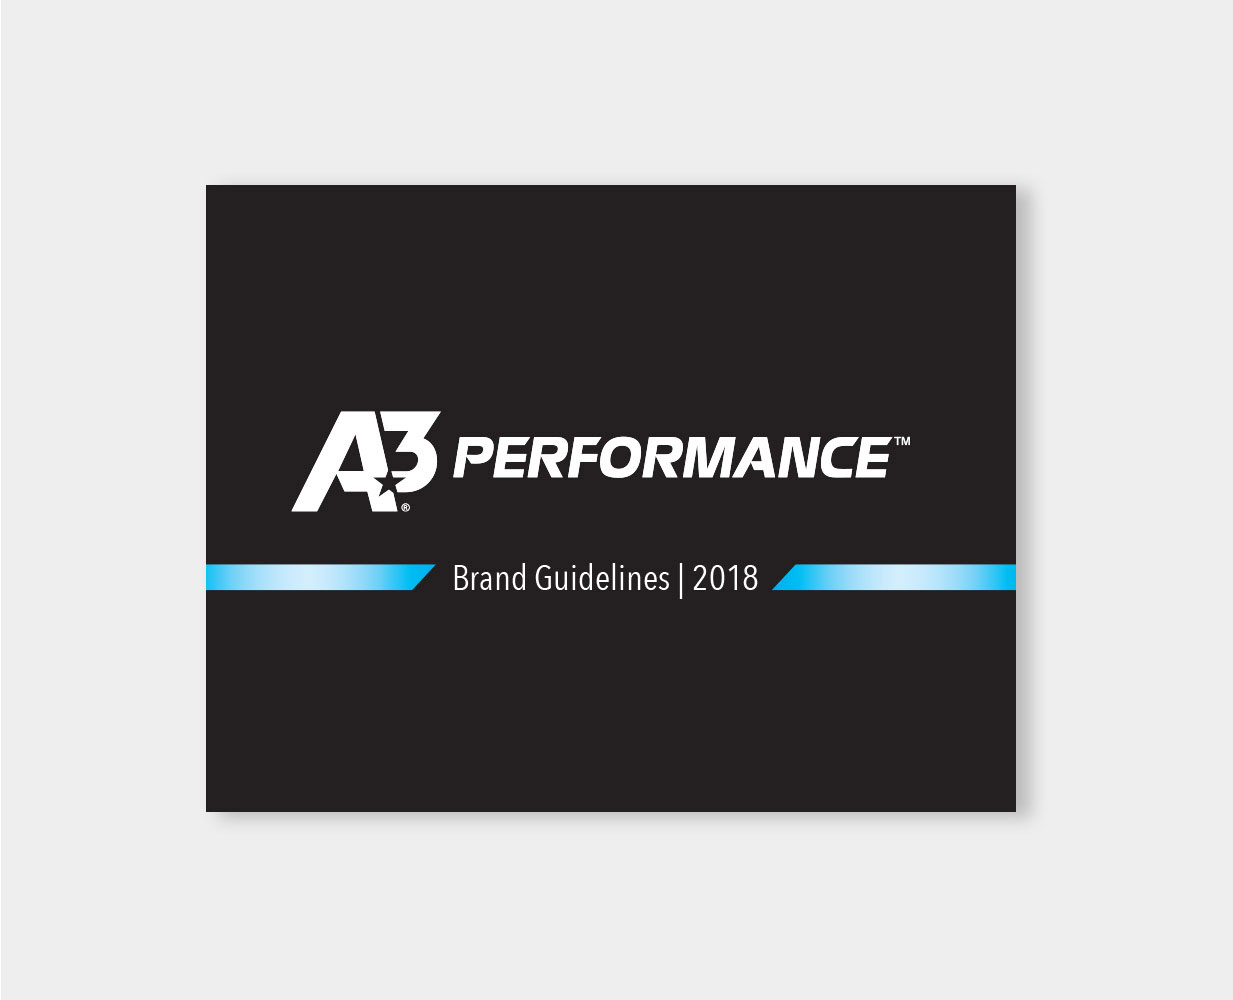 A3 Performance Brand Guidelines